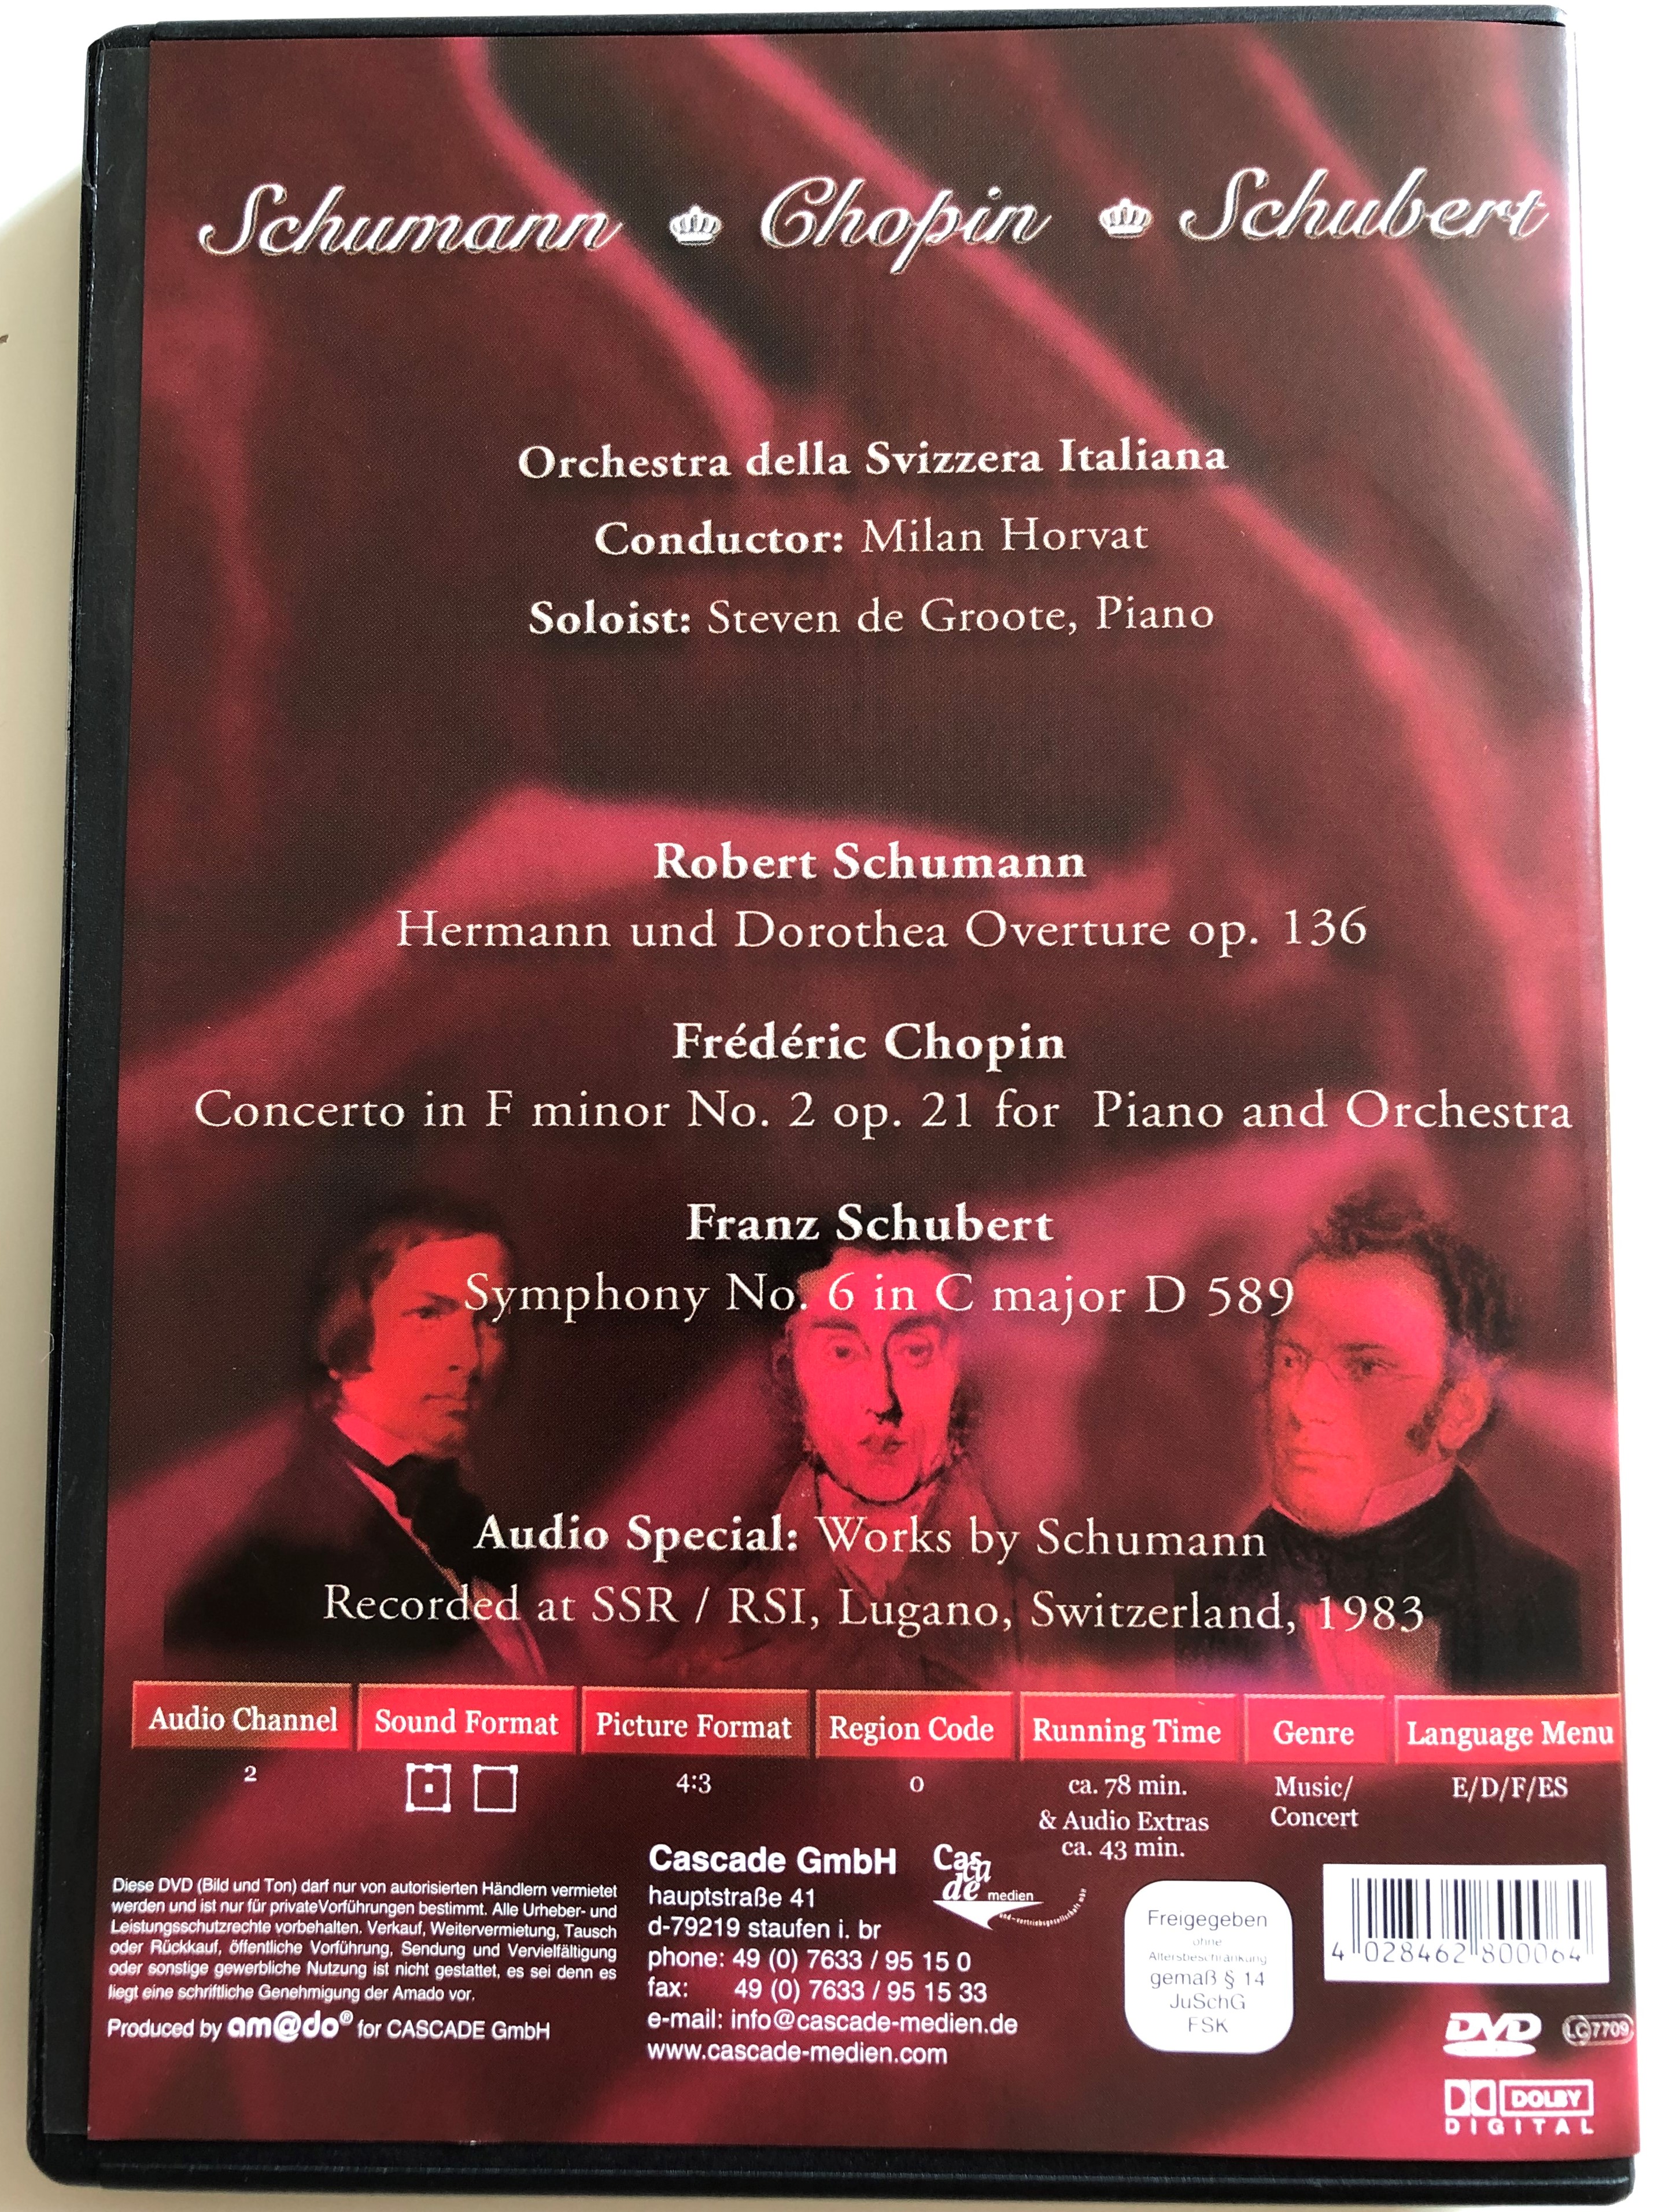 schumann-chopin-schubert-dvd-1983-hermann-und-dorothea-overture-op.-136-concerto-in-f-minor-no.-2-op.-21-piano-and-orchestra-orchestra-della-svizzera-italiana-conducted-by-milan-horvat-soloist-steven-de-groote-pia.jpg